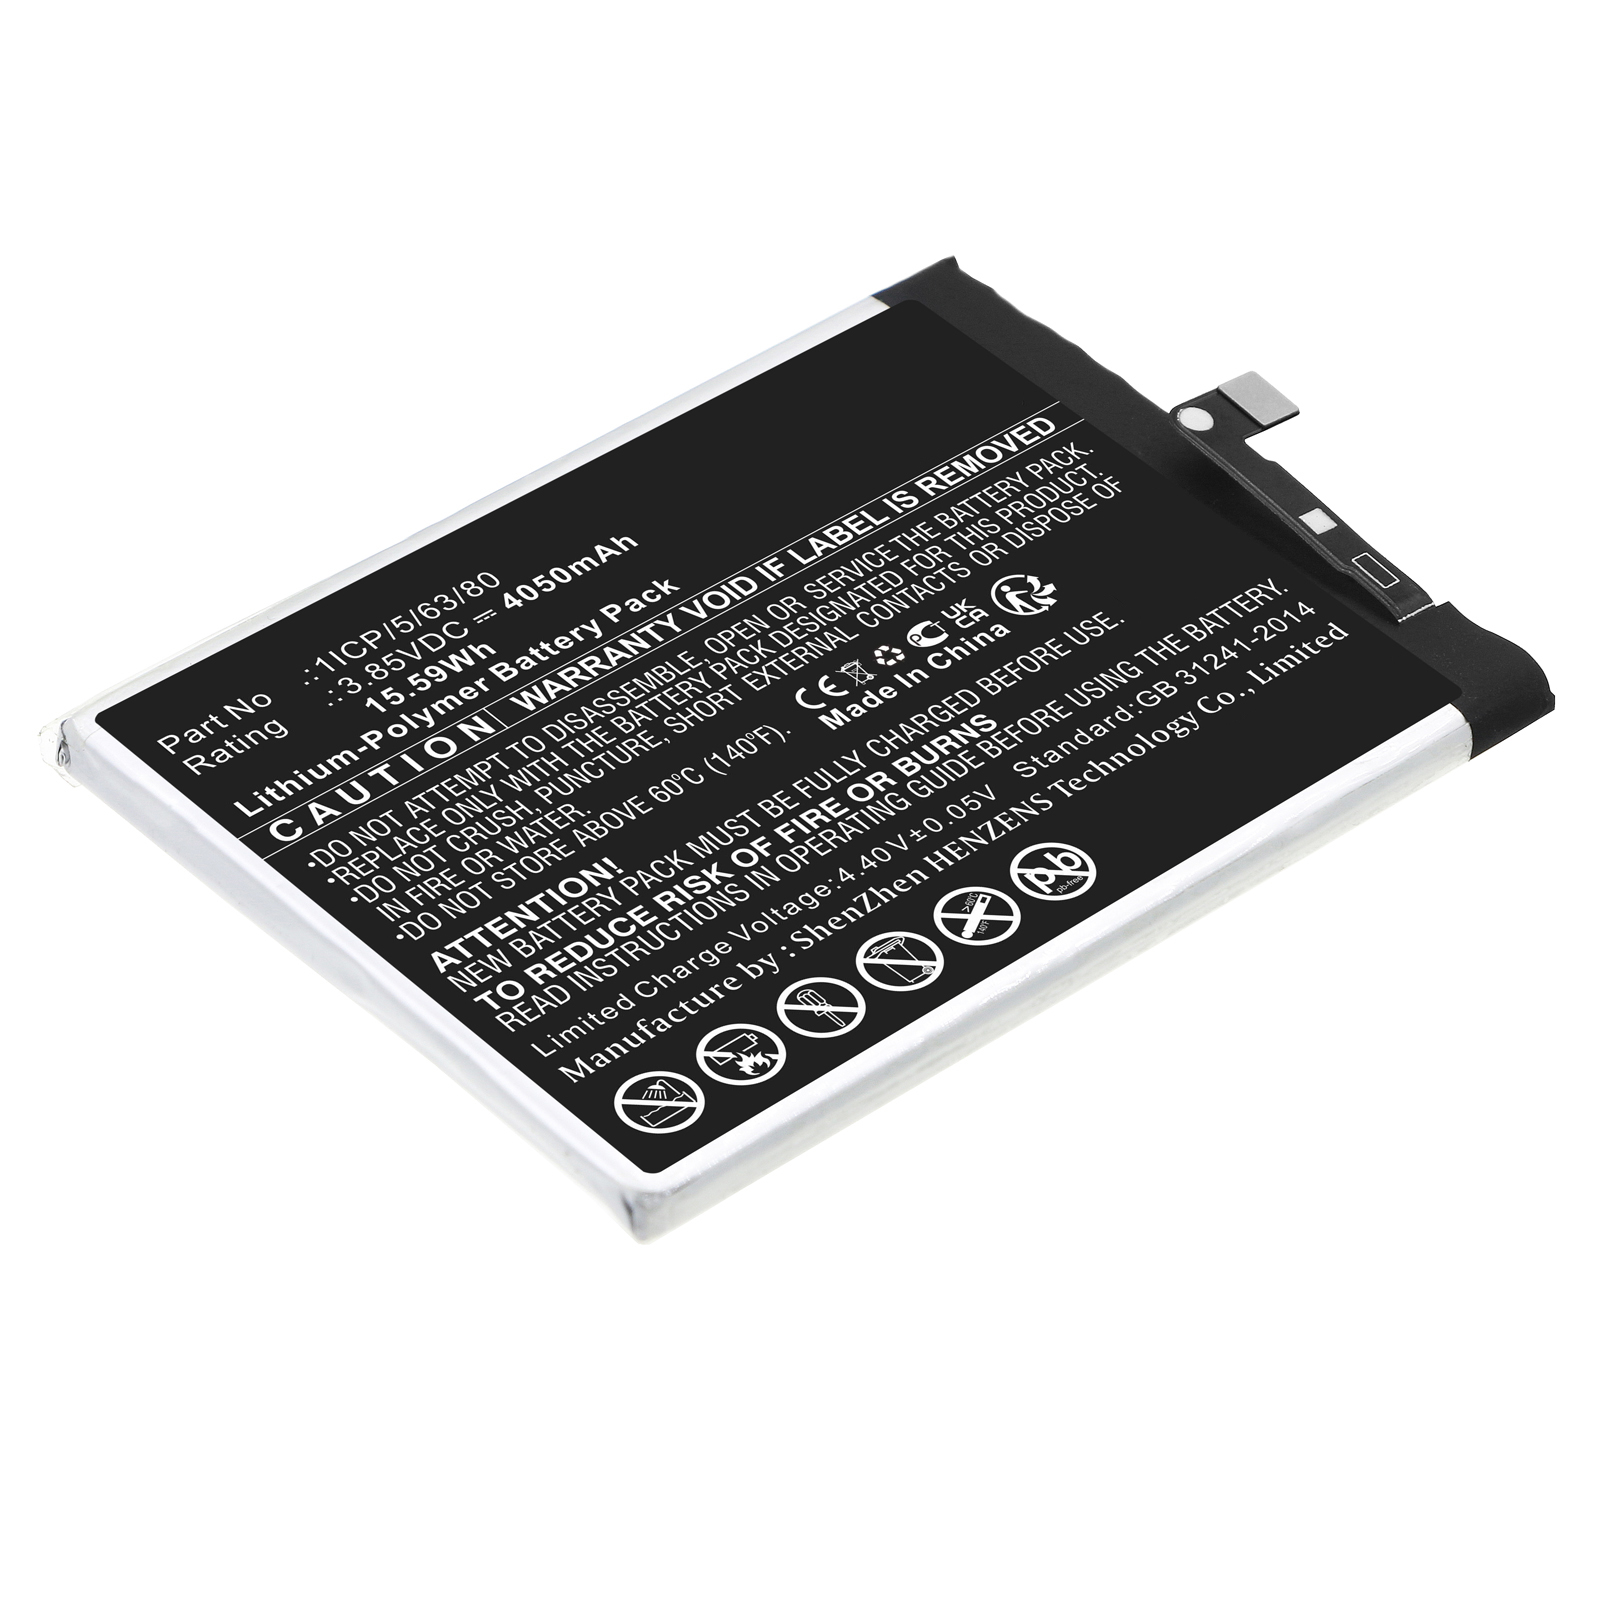 Synergy Digital Cell Phone Battery, Compatible with UMI 1ICP/5/63/80 Cell Phone Battery (Li-Pol, 3.85V, 4050mAh)